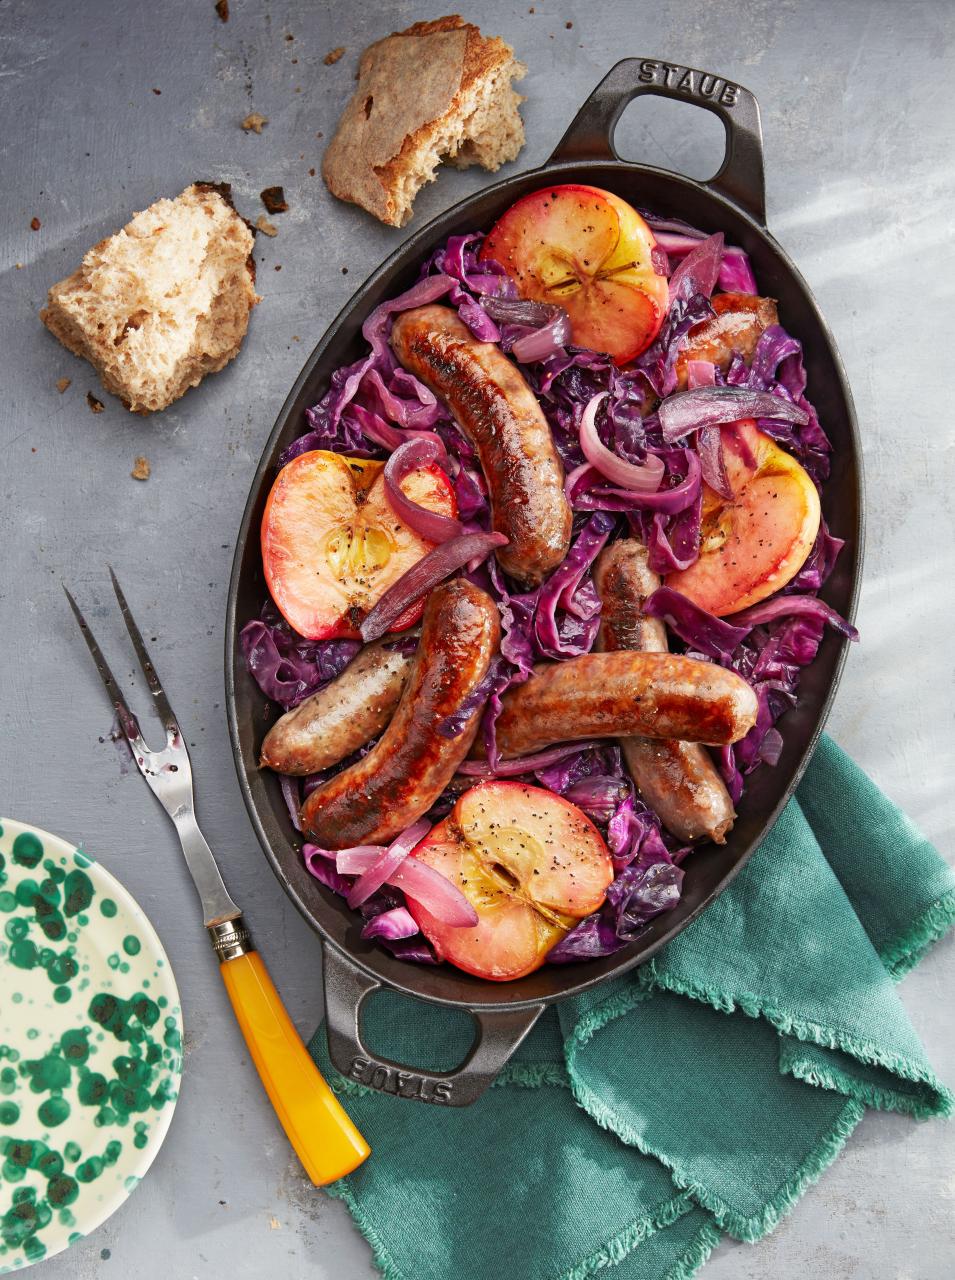 Best Seared Sausage with Cabbage and Pink Lady Apples Recipe - How to Make  Seared Sausage with Cabbage and Pink Lady Apples